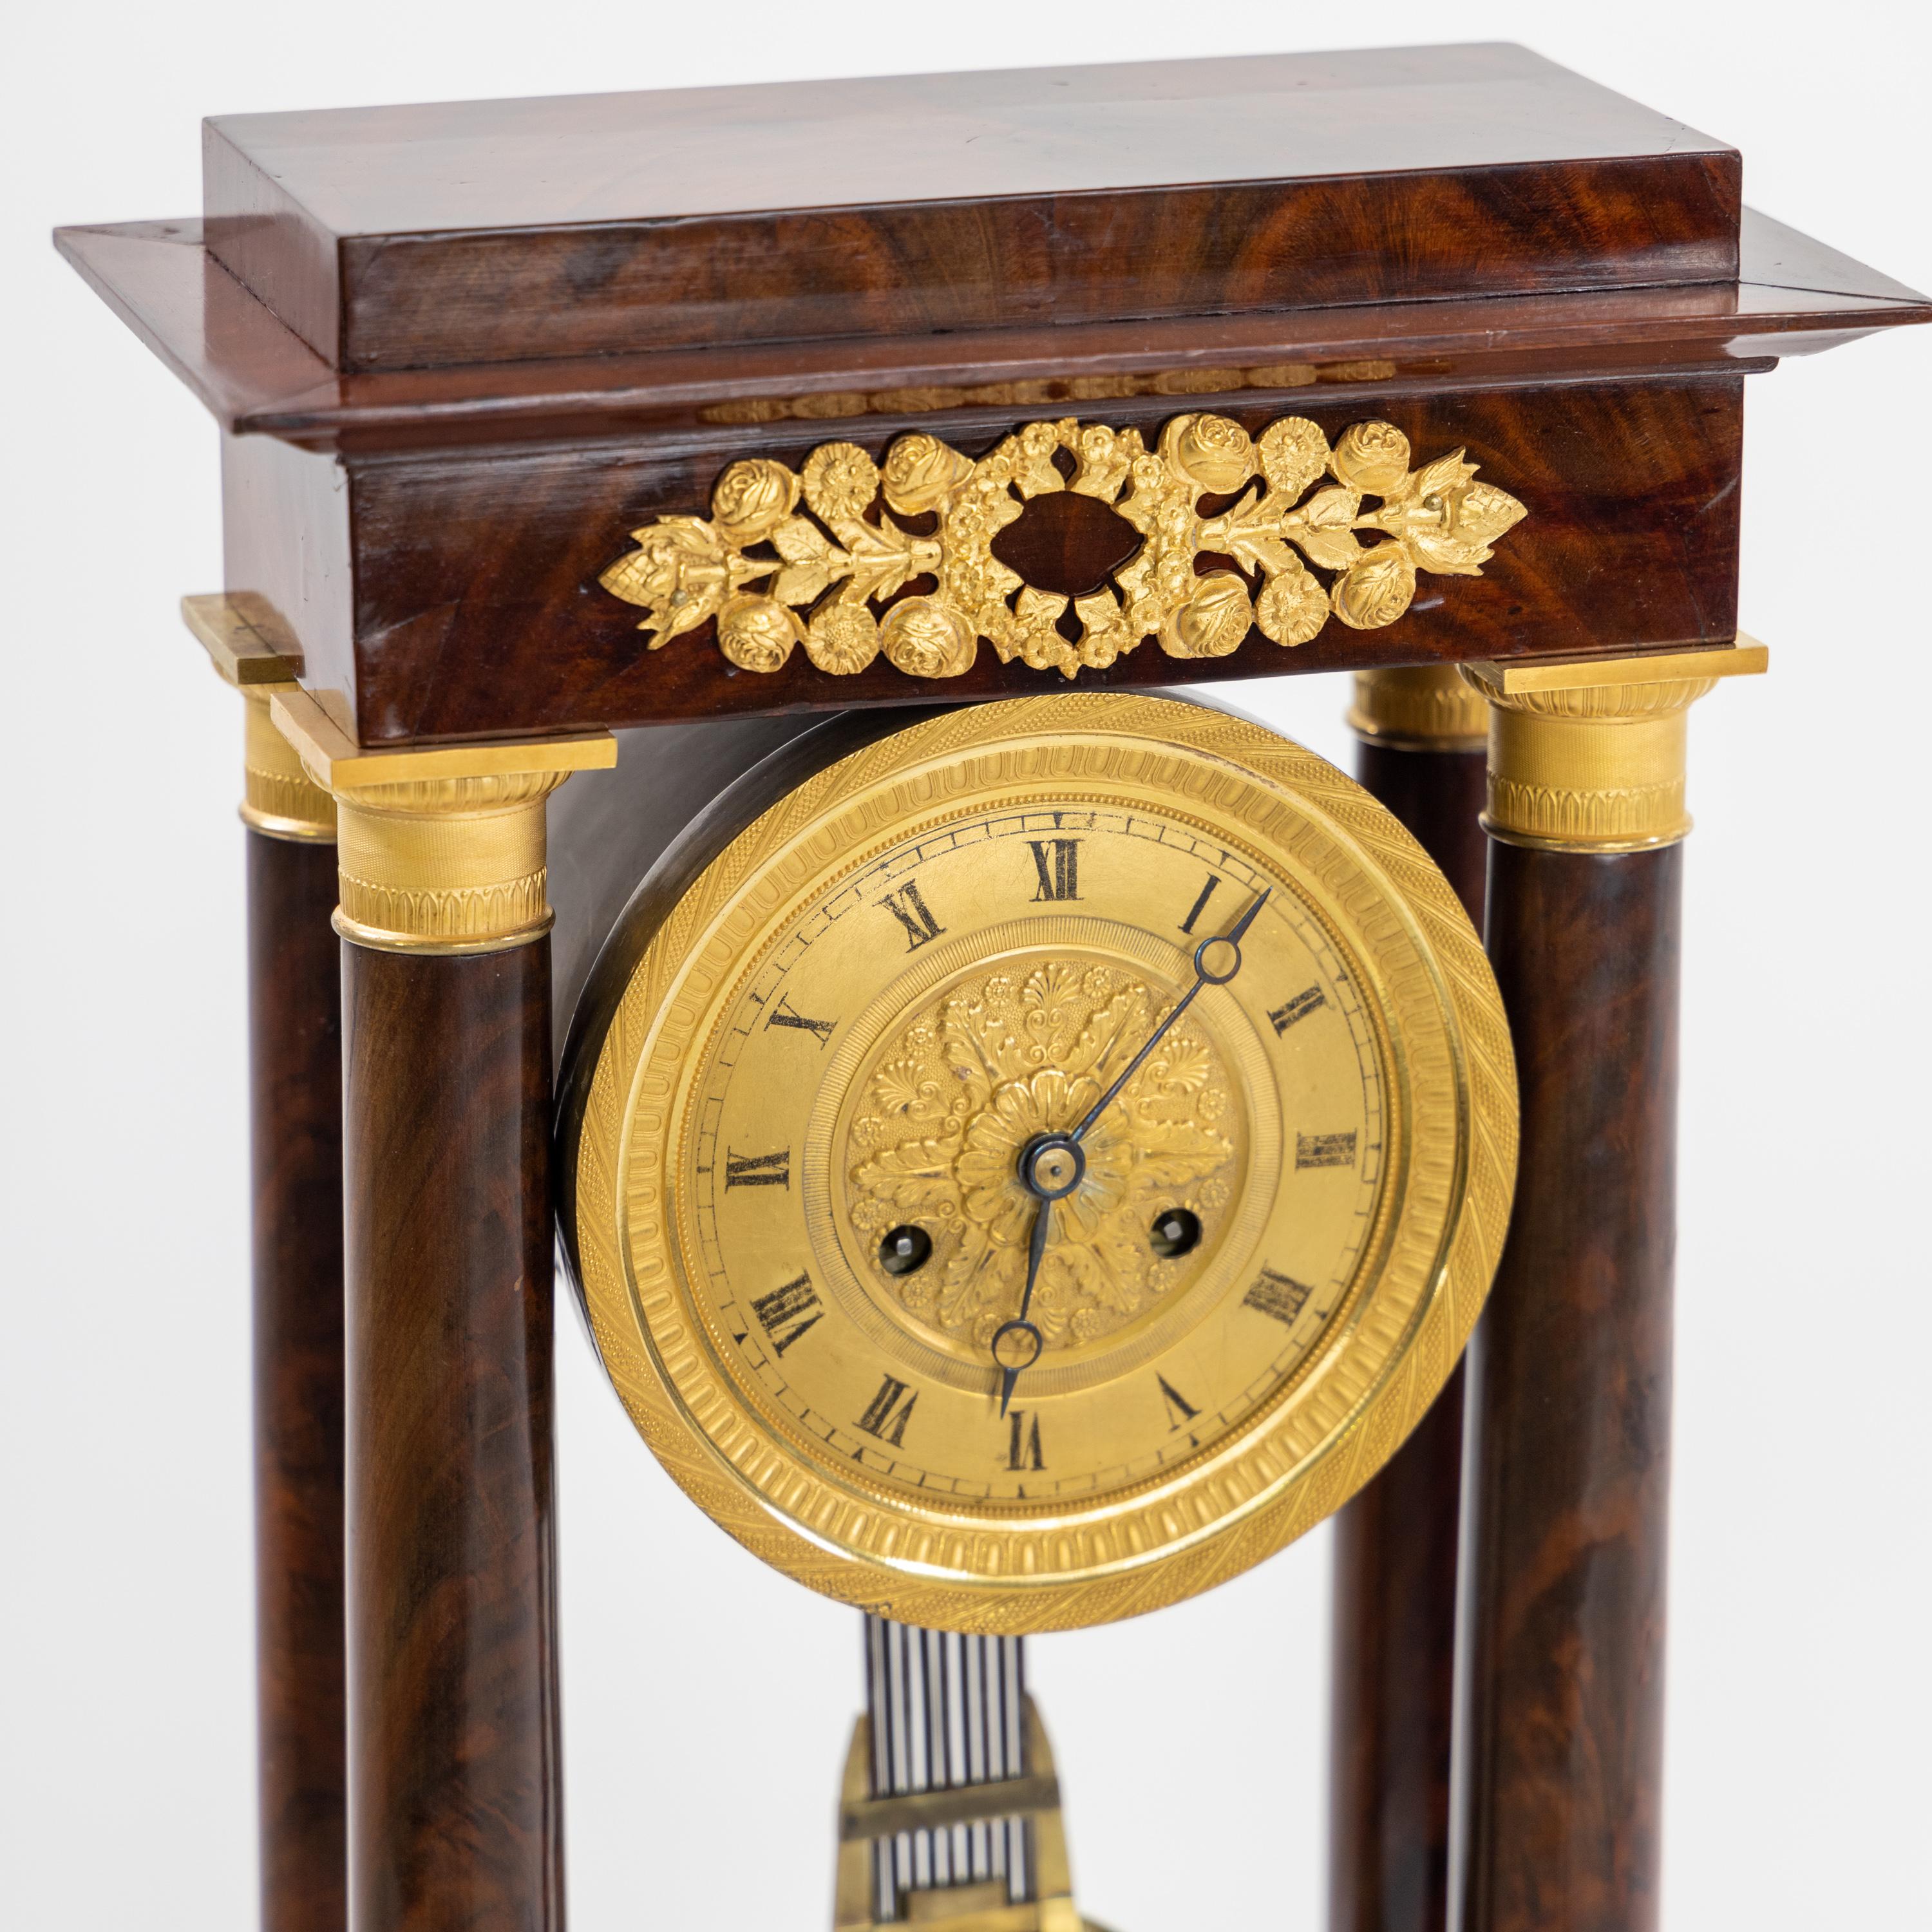 Portal clock on rectangular stepped base in mahogany veneer with small squeeze feet and fire-gilded applications in the form of rose festoons. The stepped architrave is supported by four smooth columns; the capitals and bases are made of fire-gilded